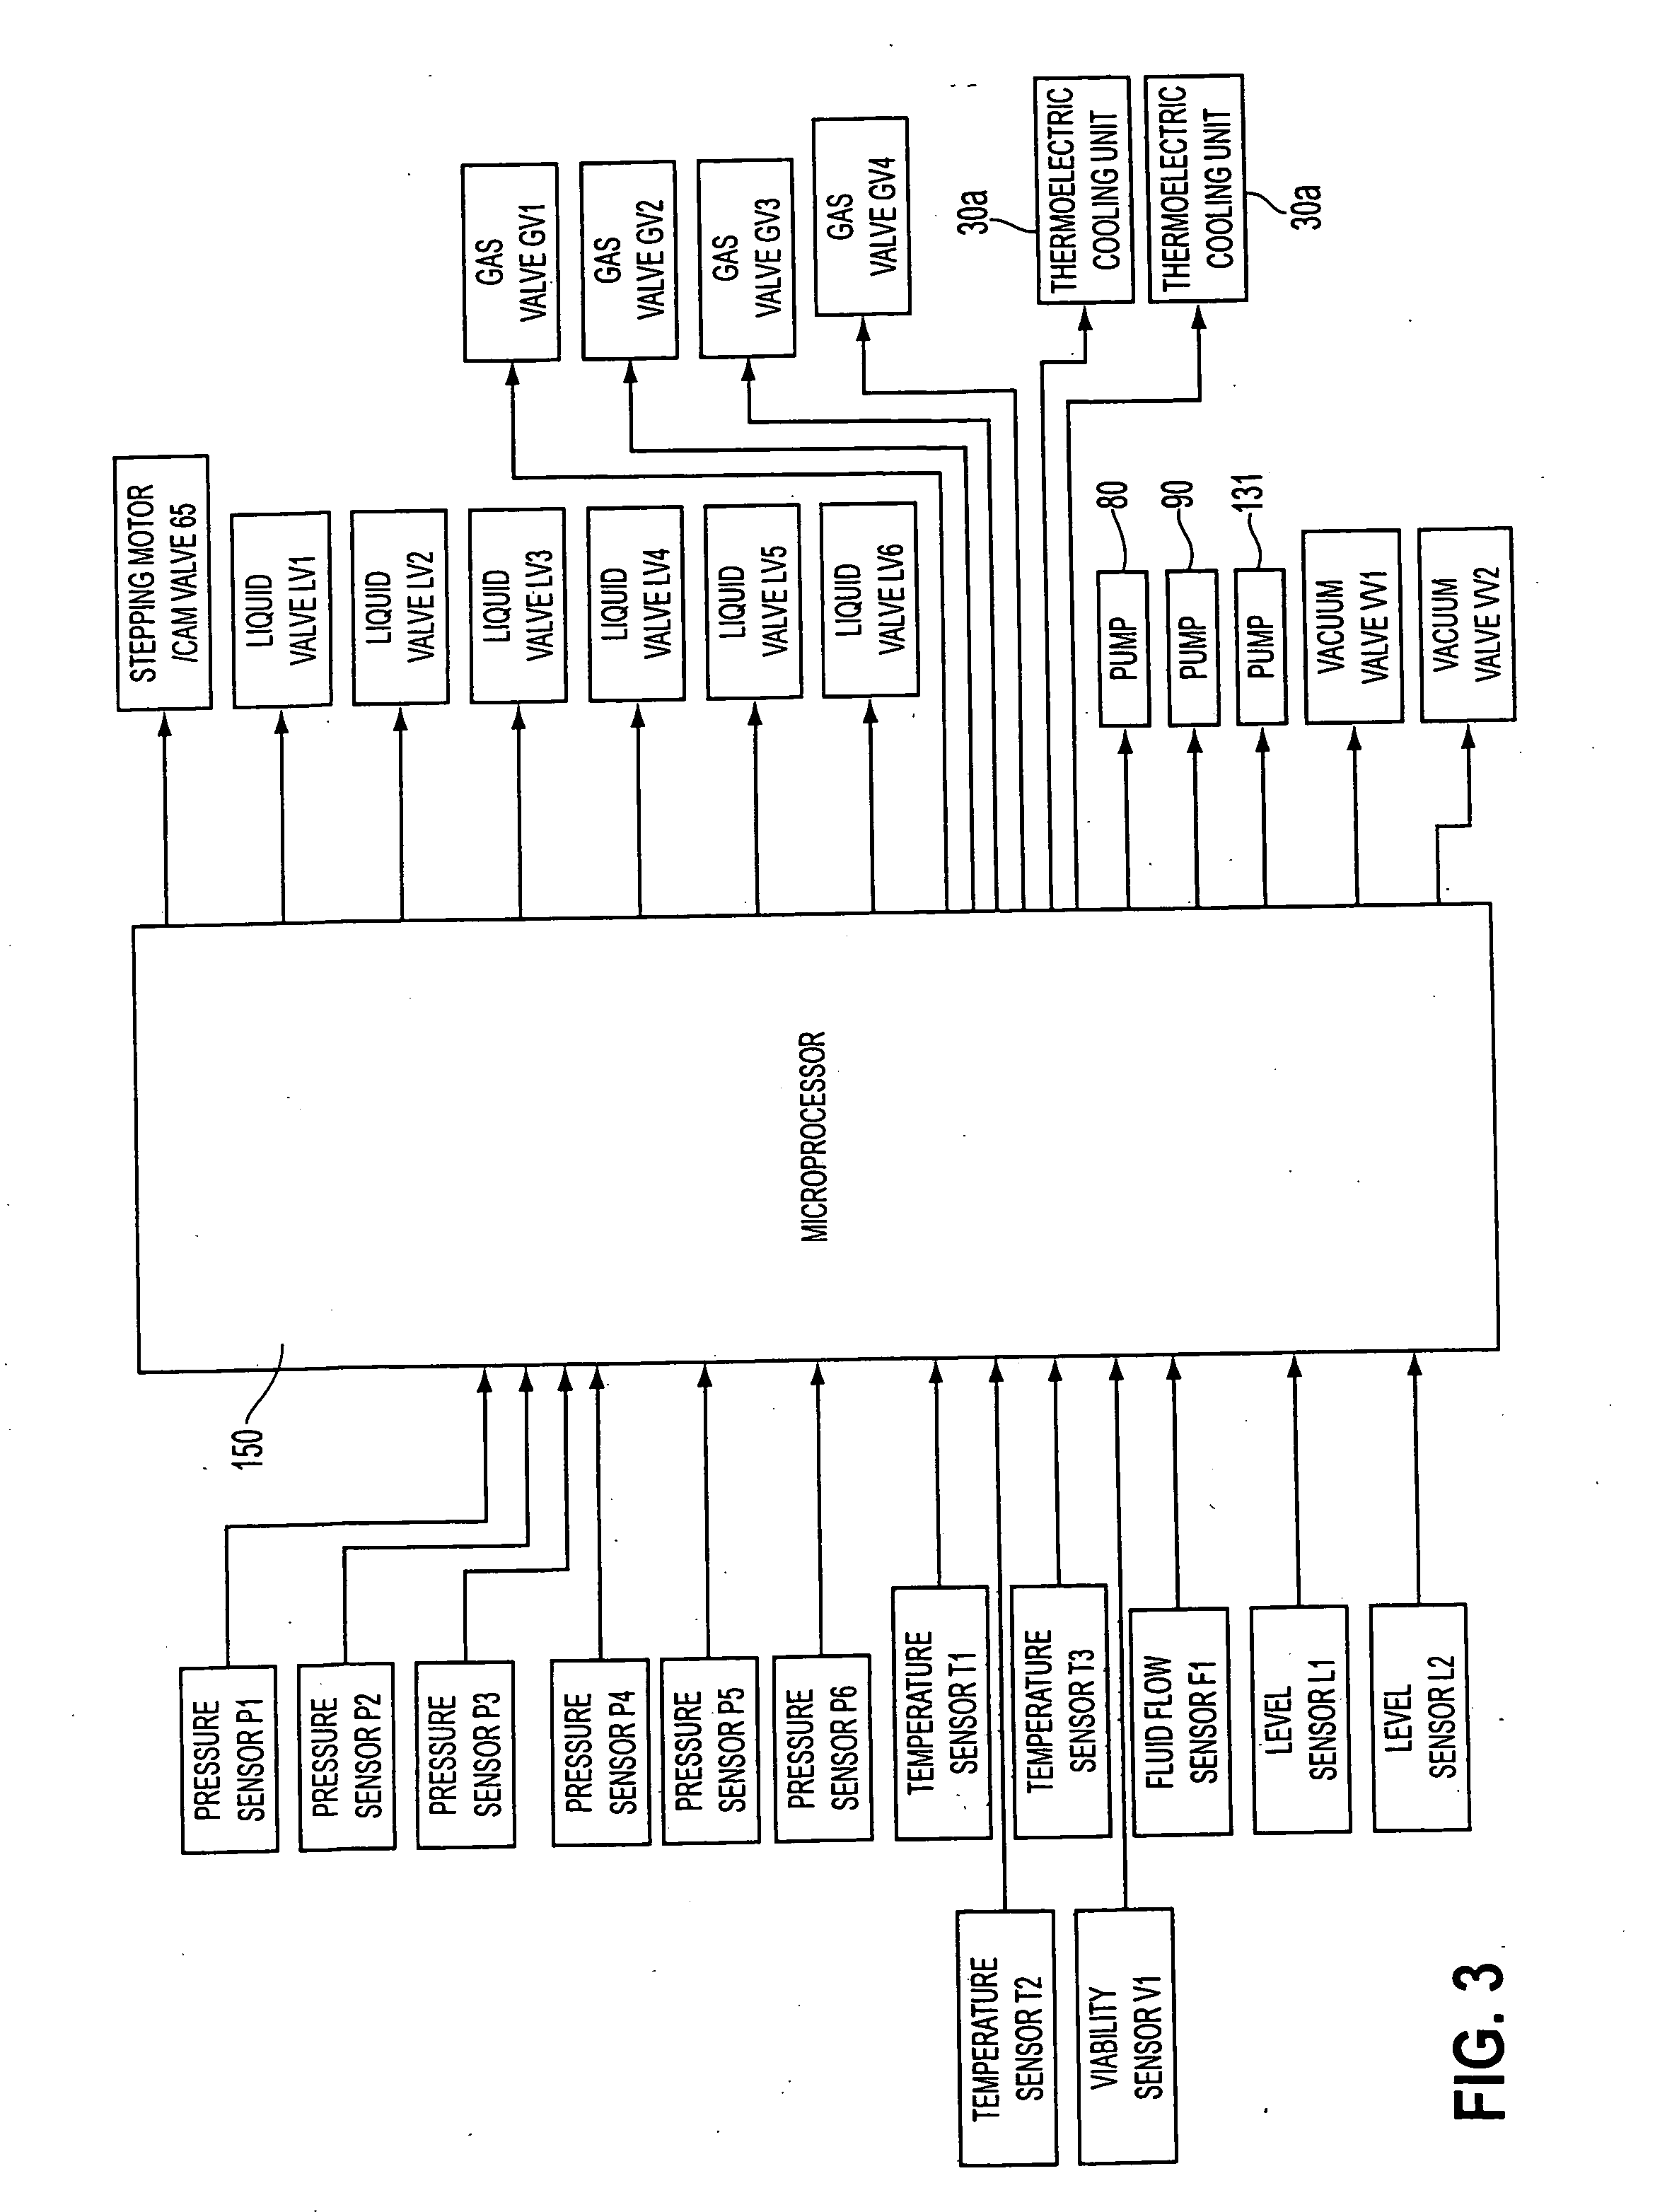 Apparatus and method for perfusing an organ or tissue for isolating cells from the organ or tissue